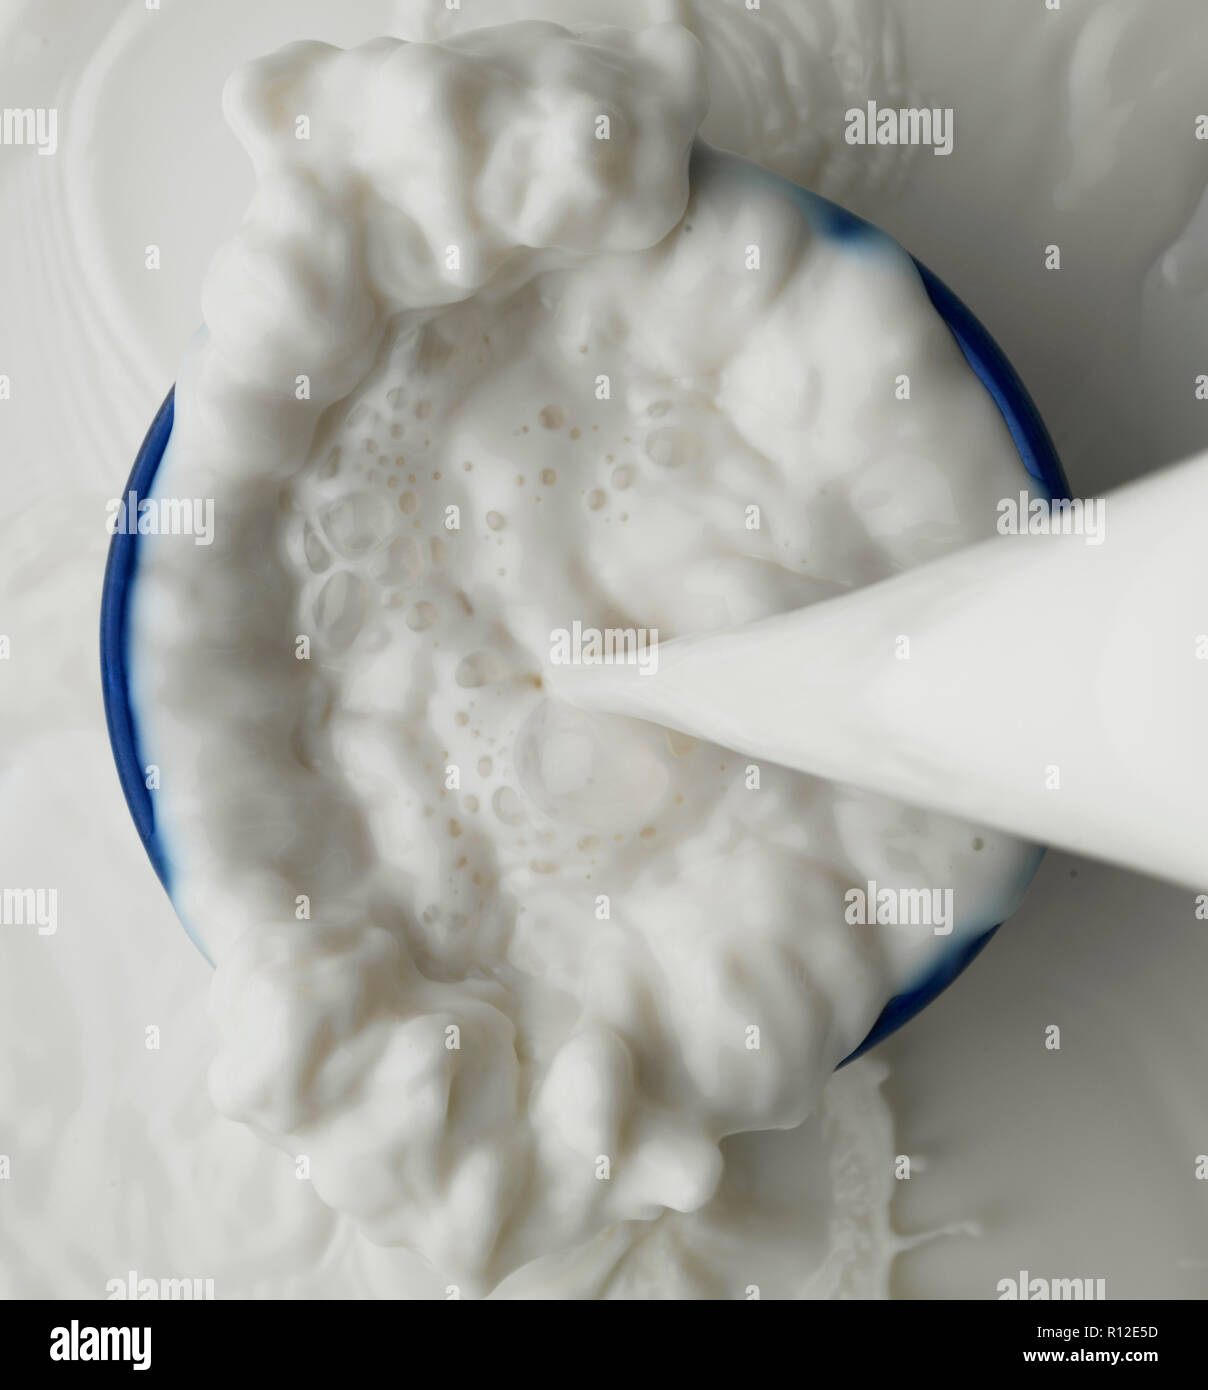 Milk being poured to overflow into bowl Stock Photo